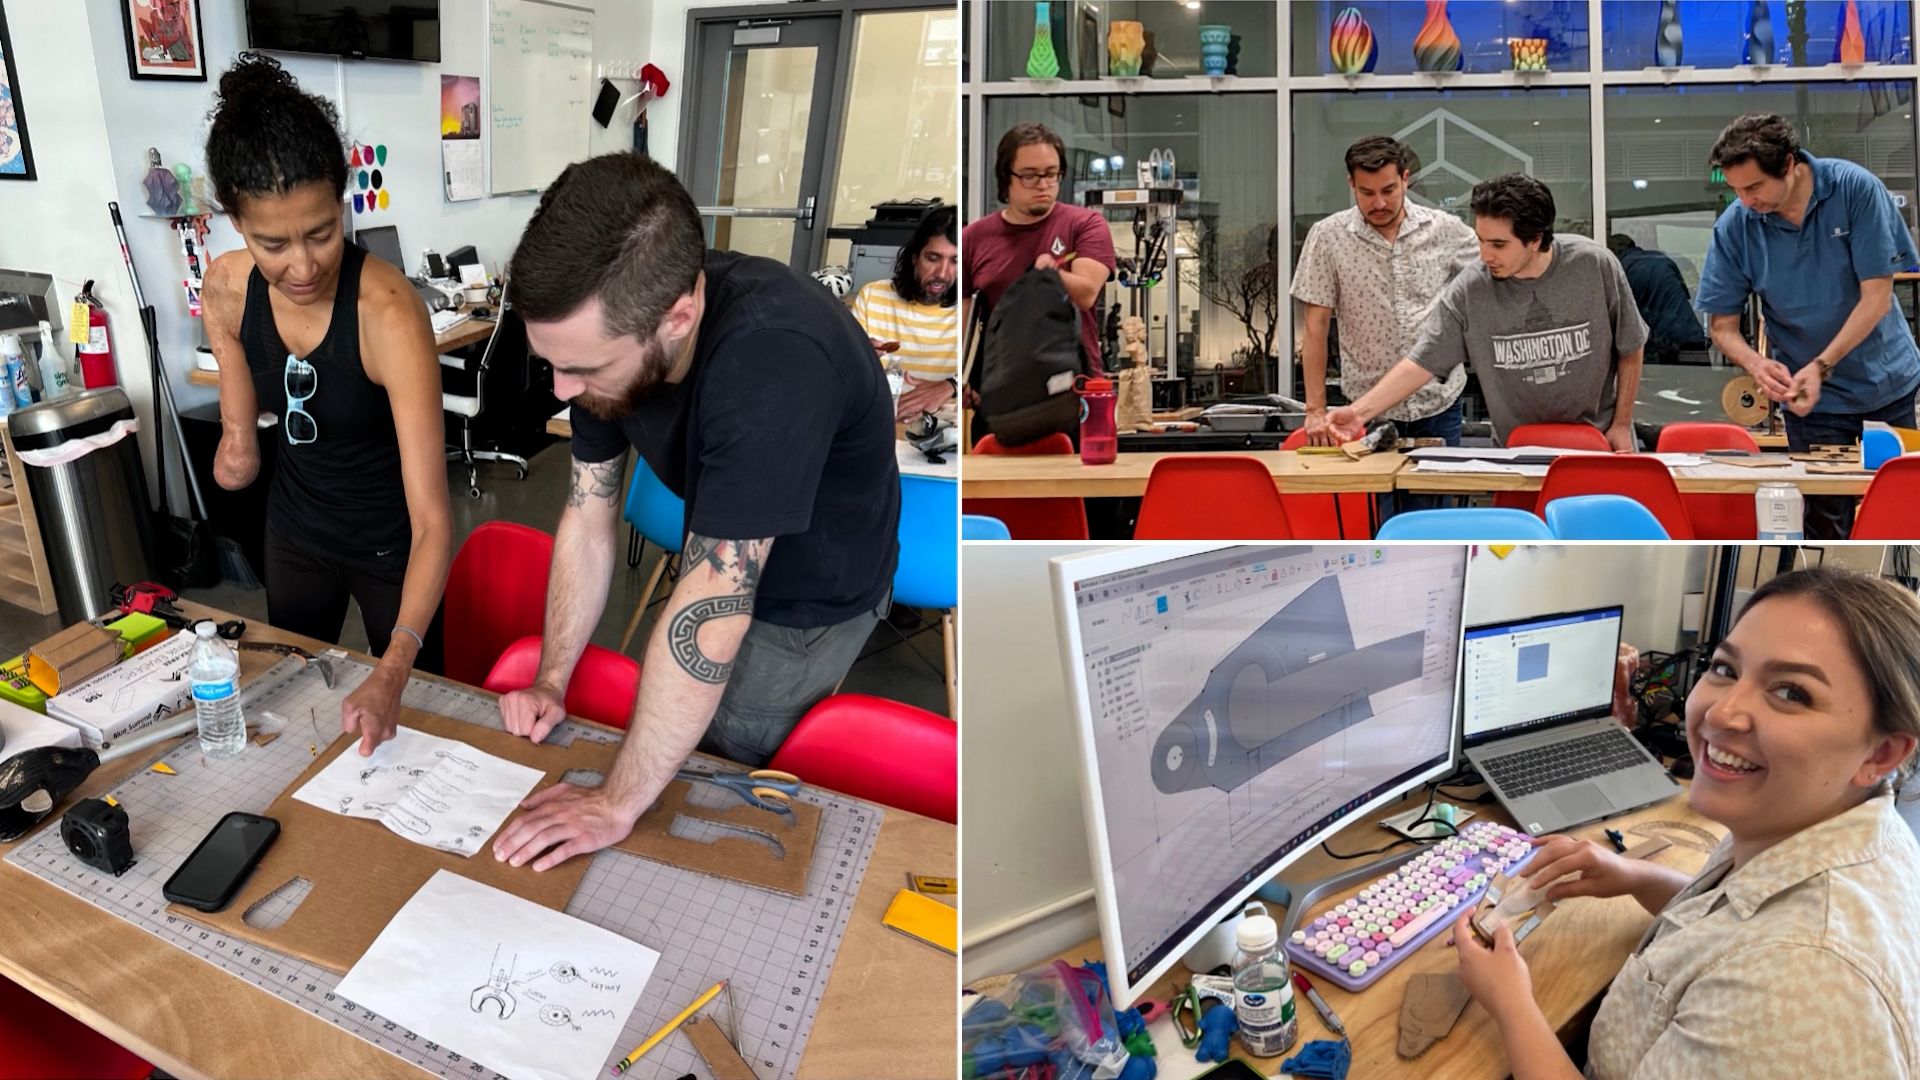 A collage of images from Fab Lab El Paso's Make-a-Thon.